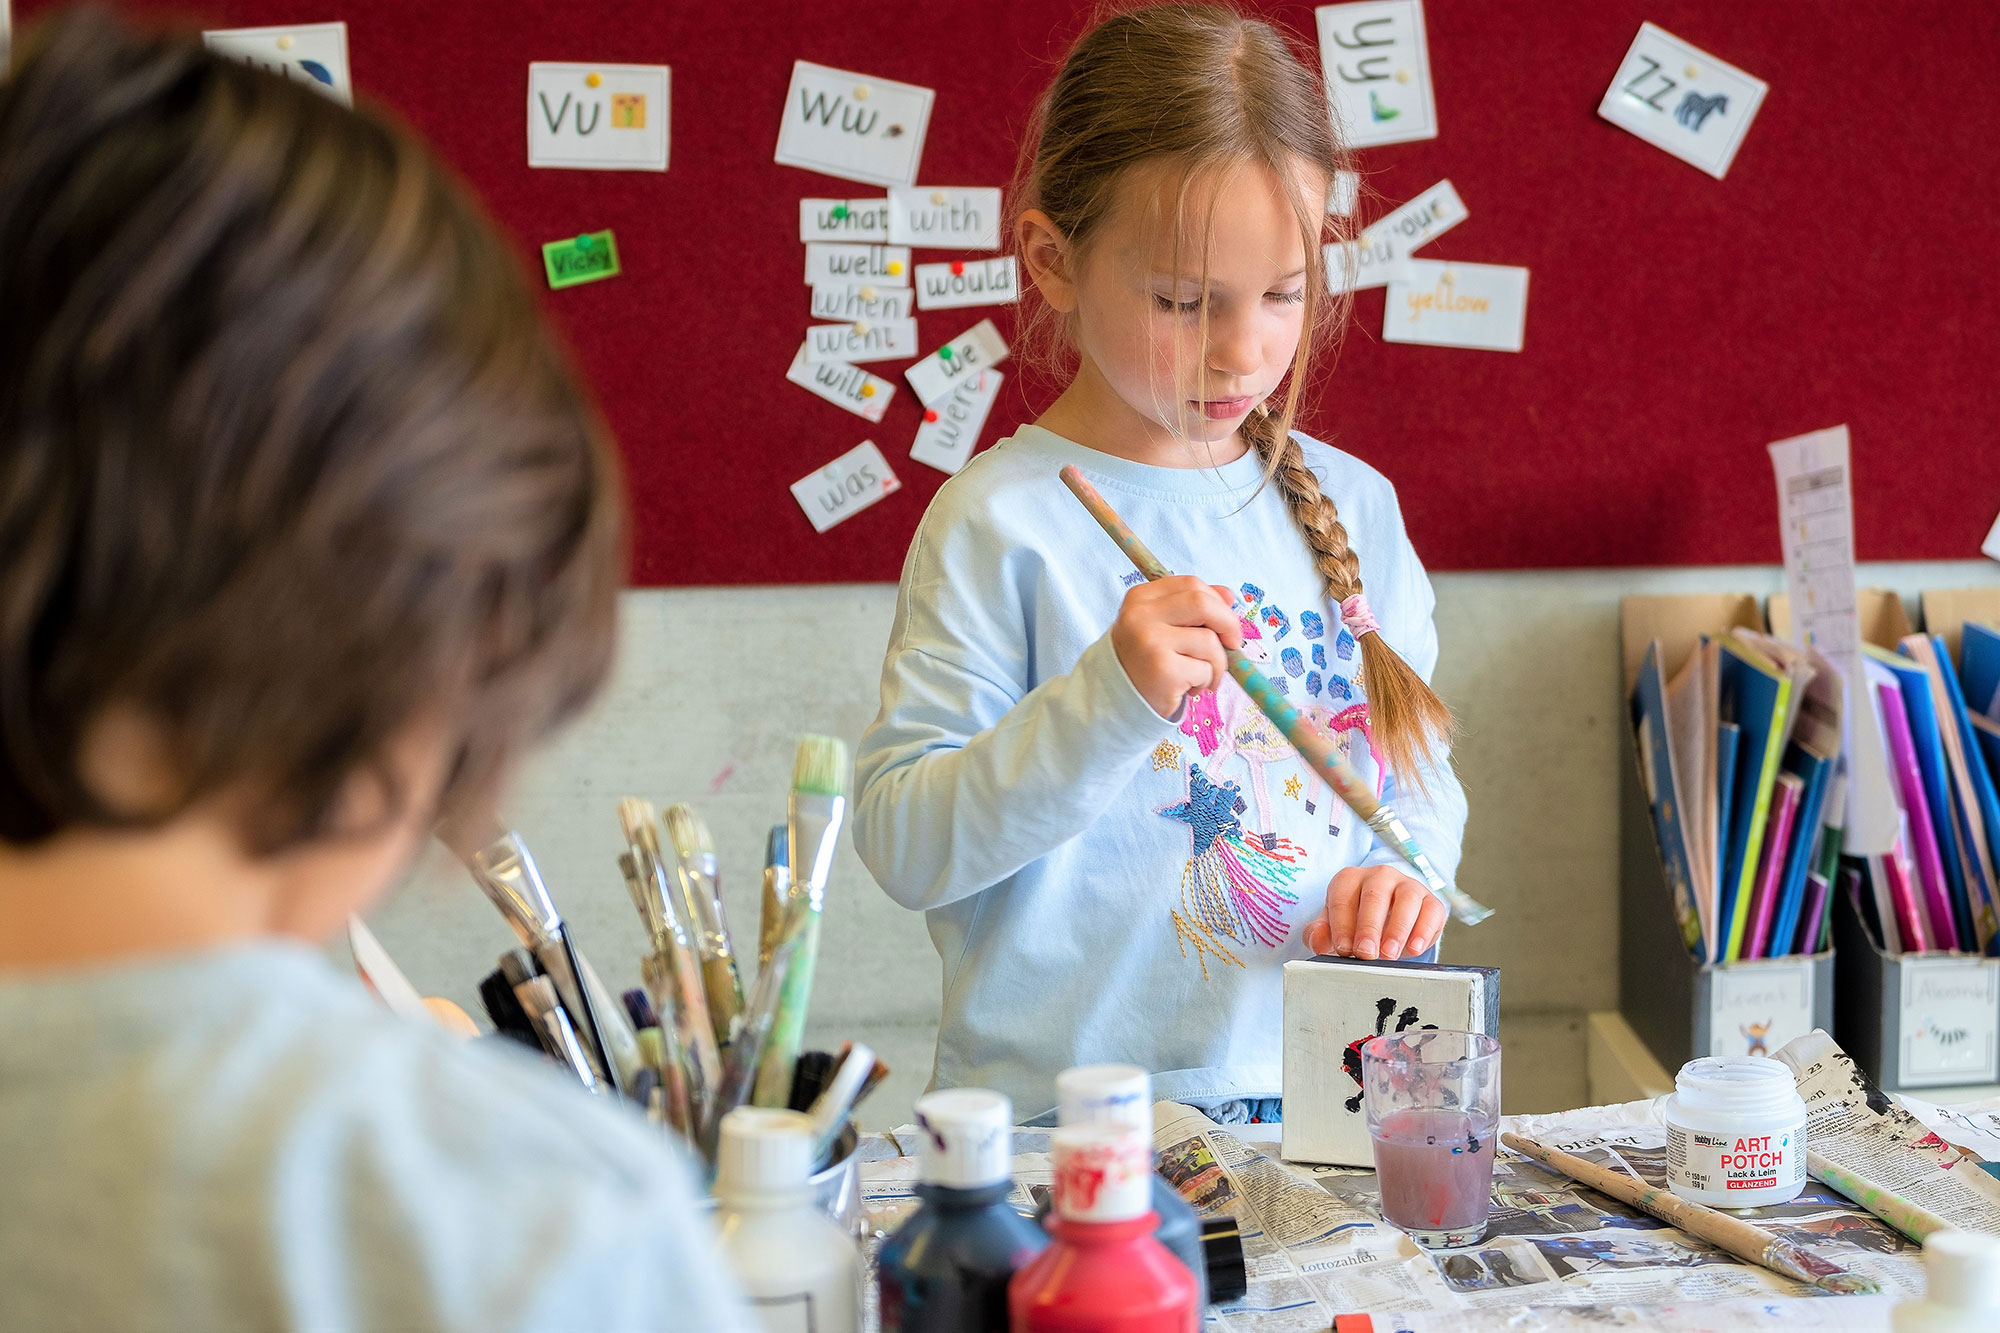 A little girl is holding a paintbrush and working on an arts project.	